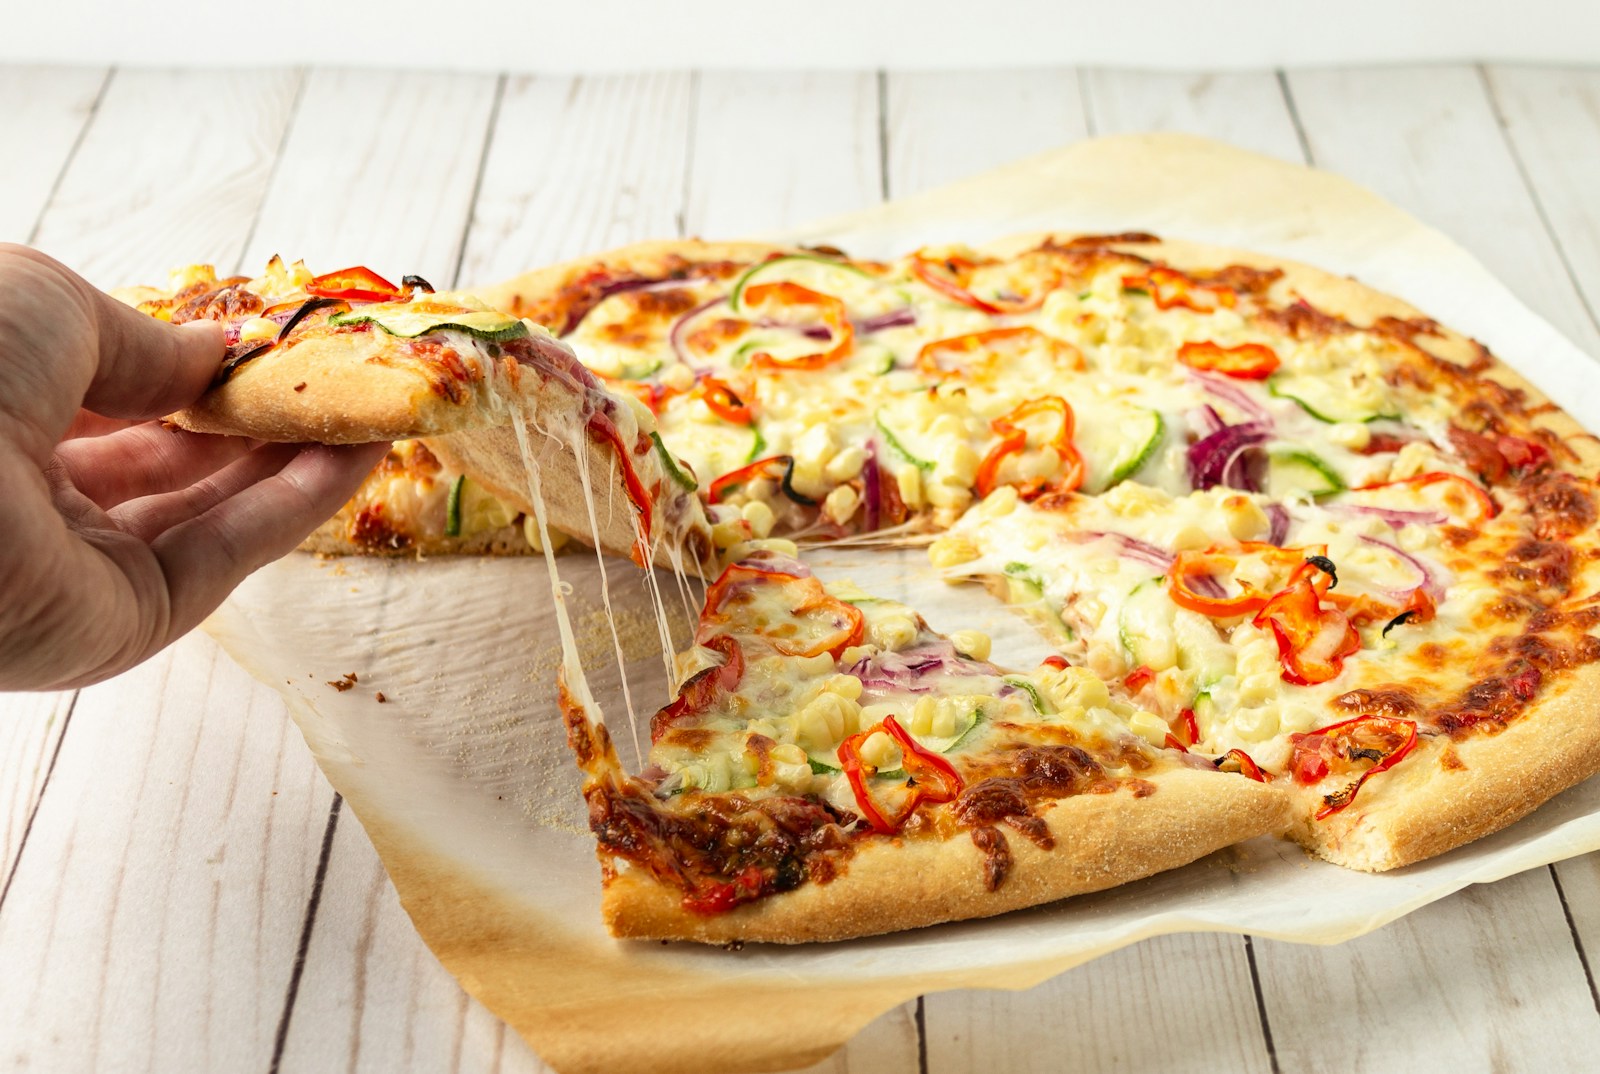 Loaded Green Pepper and Onion Pizza